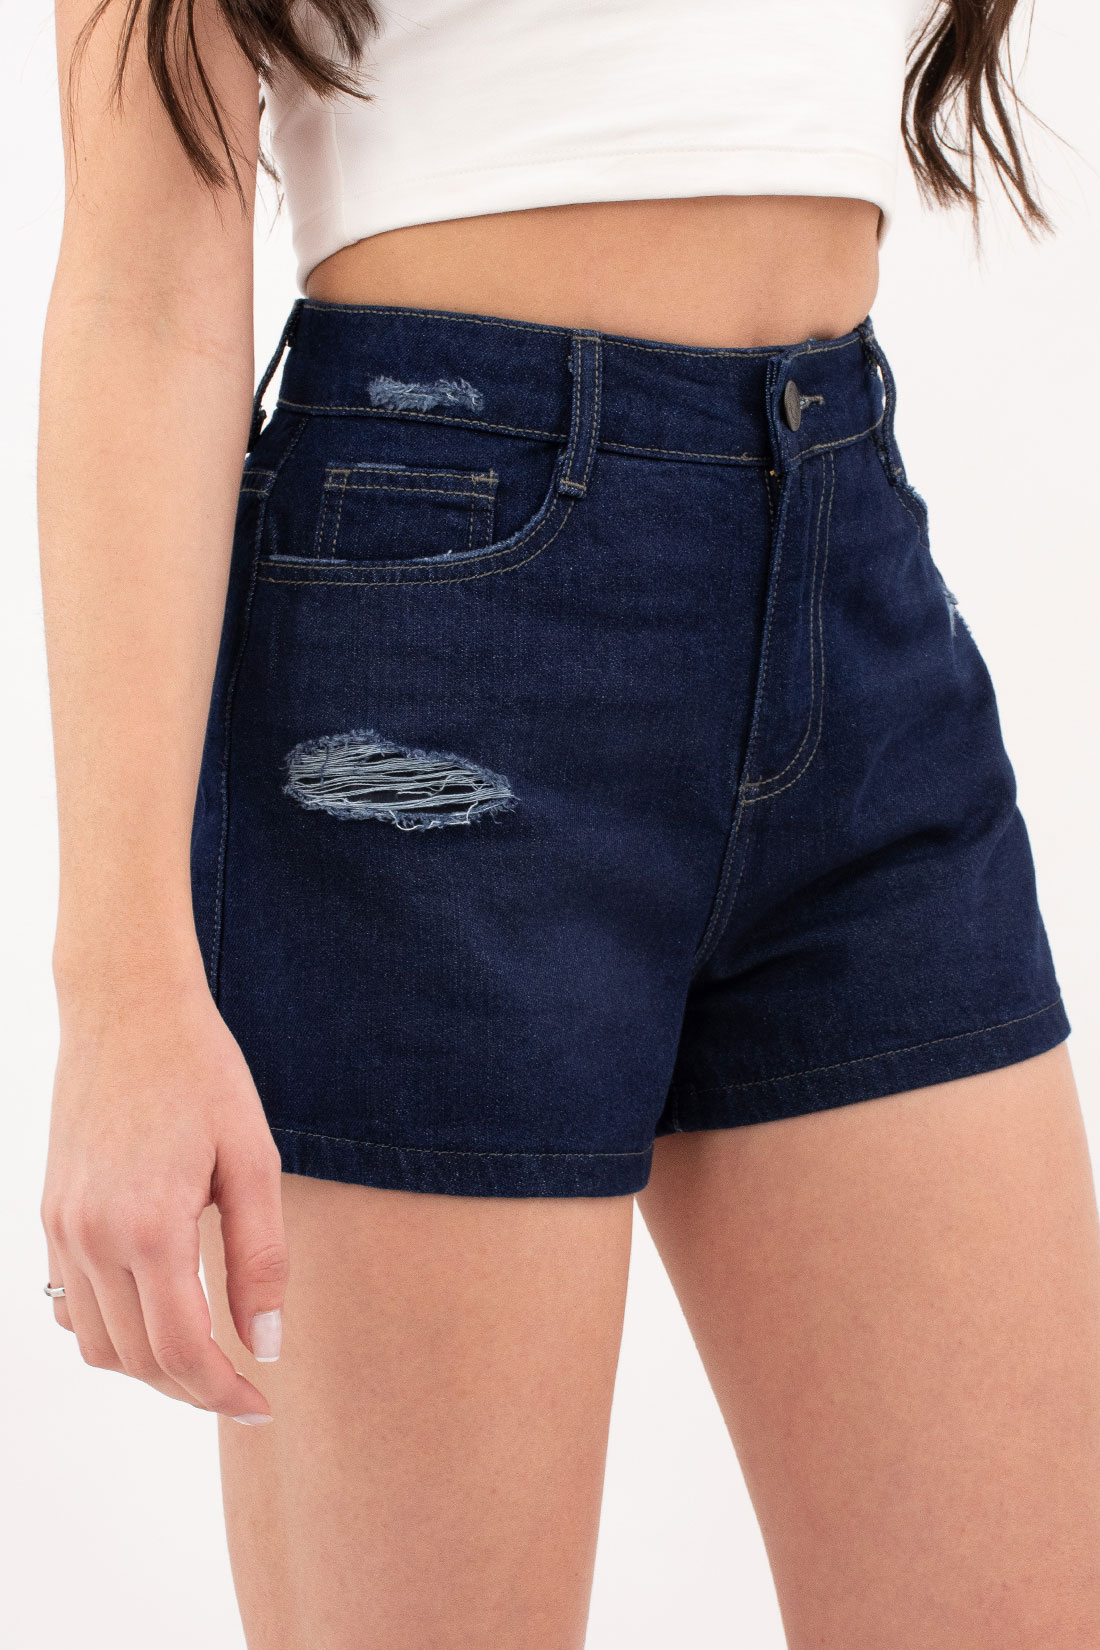 Shorts Jeans Hering Puido